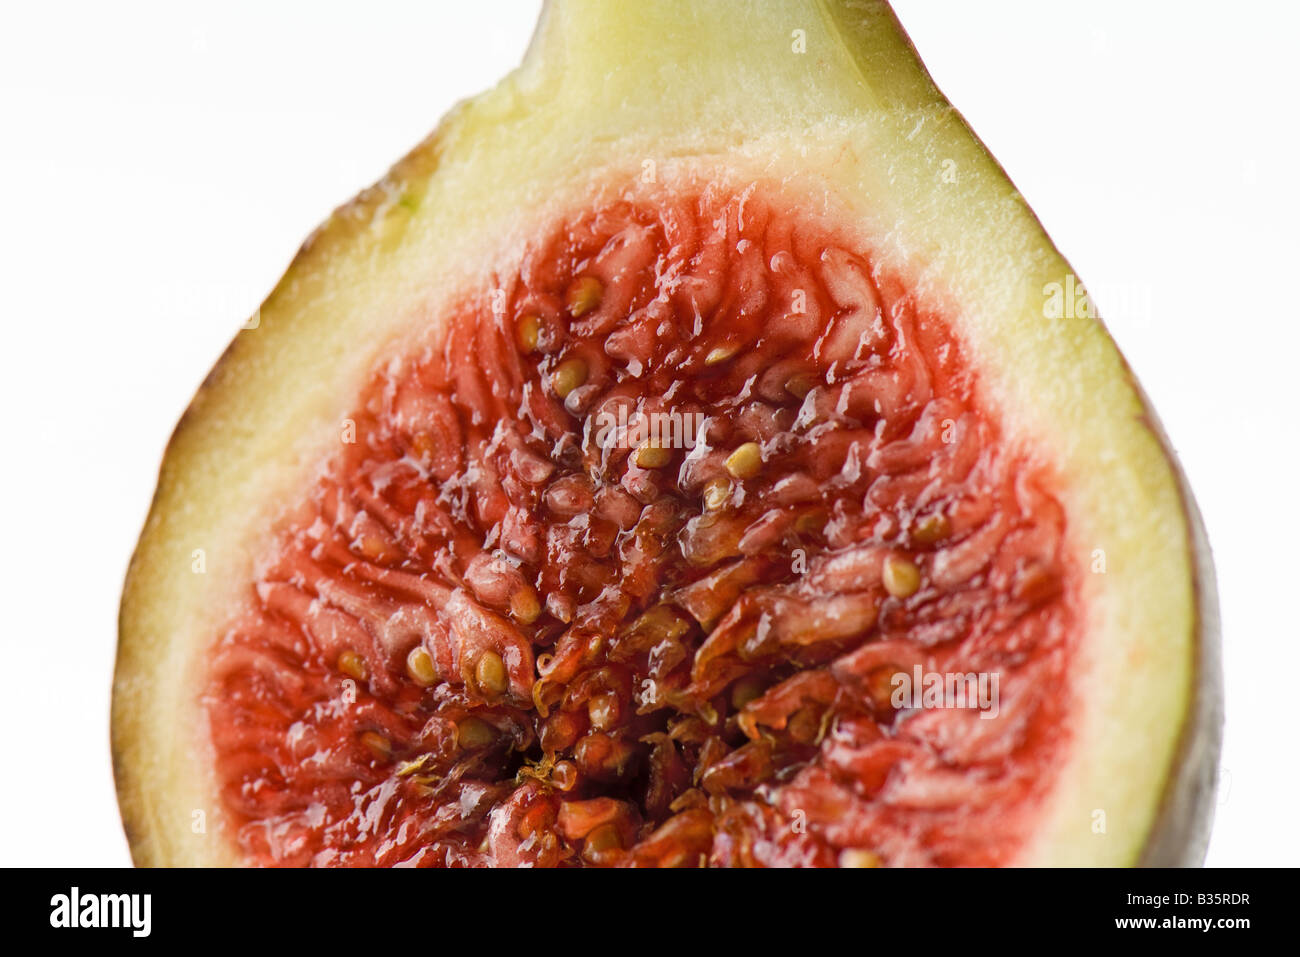 Fresh fig, cross section, close-up Stock Photo